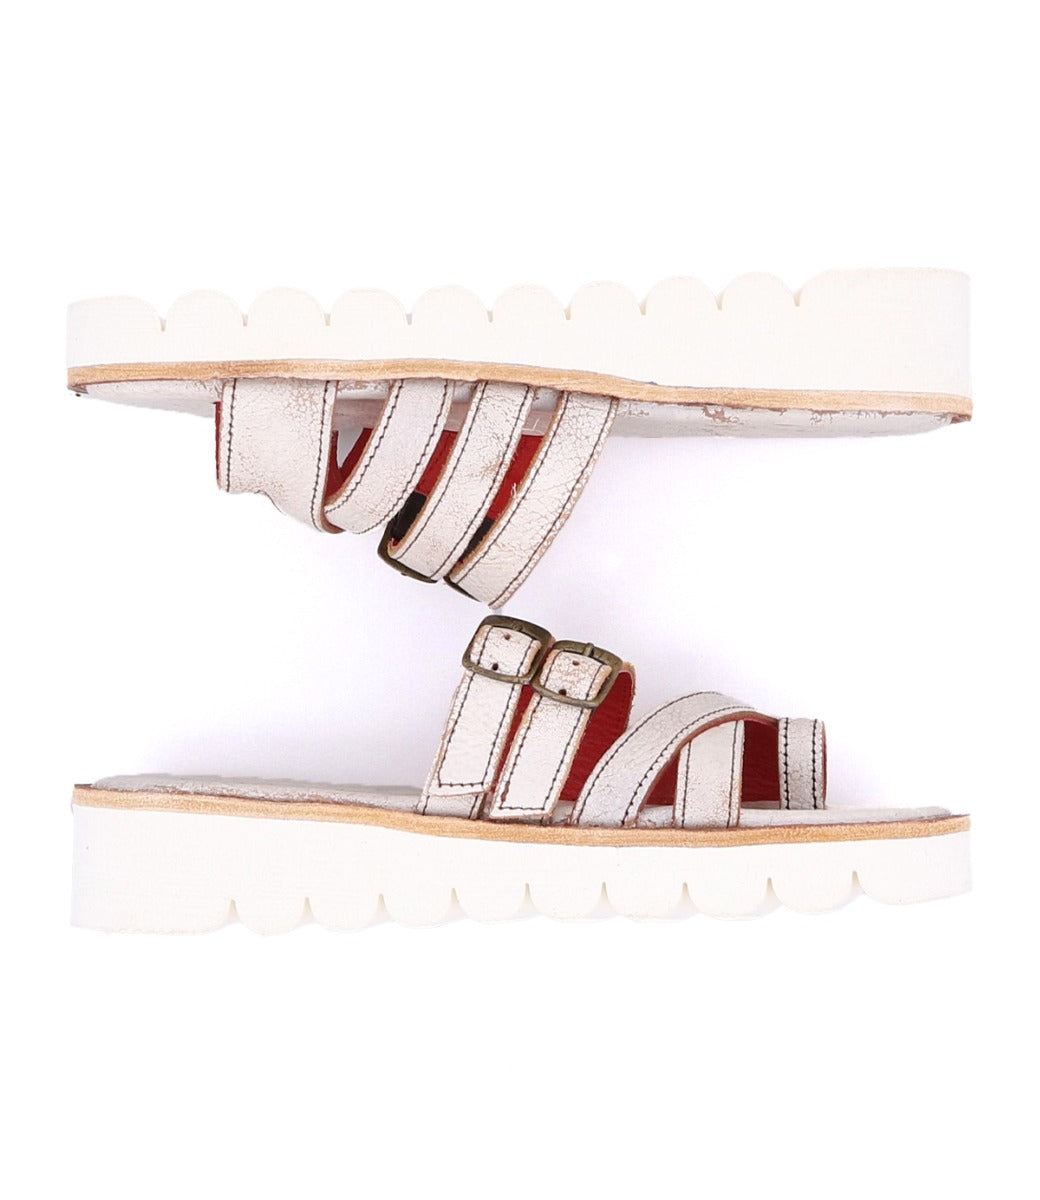 A pair of white sandals with straps and buckles by Bed Stu.